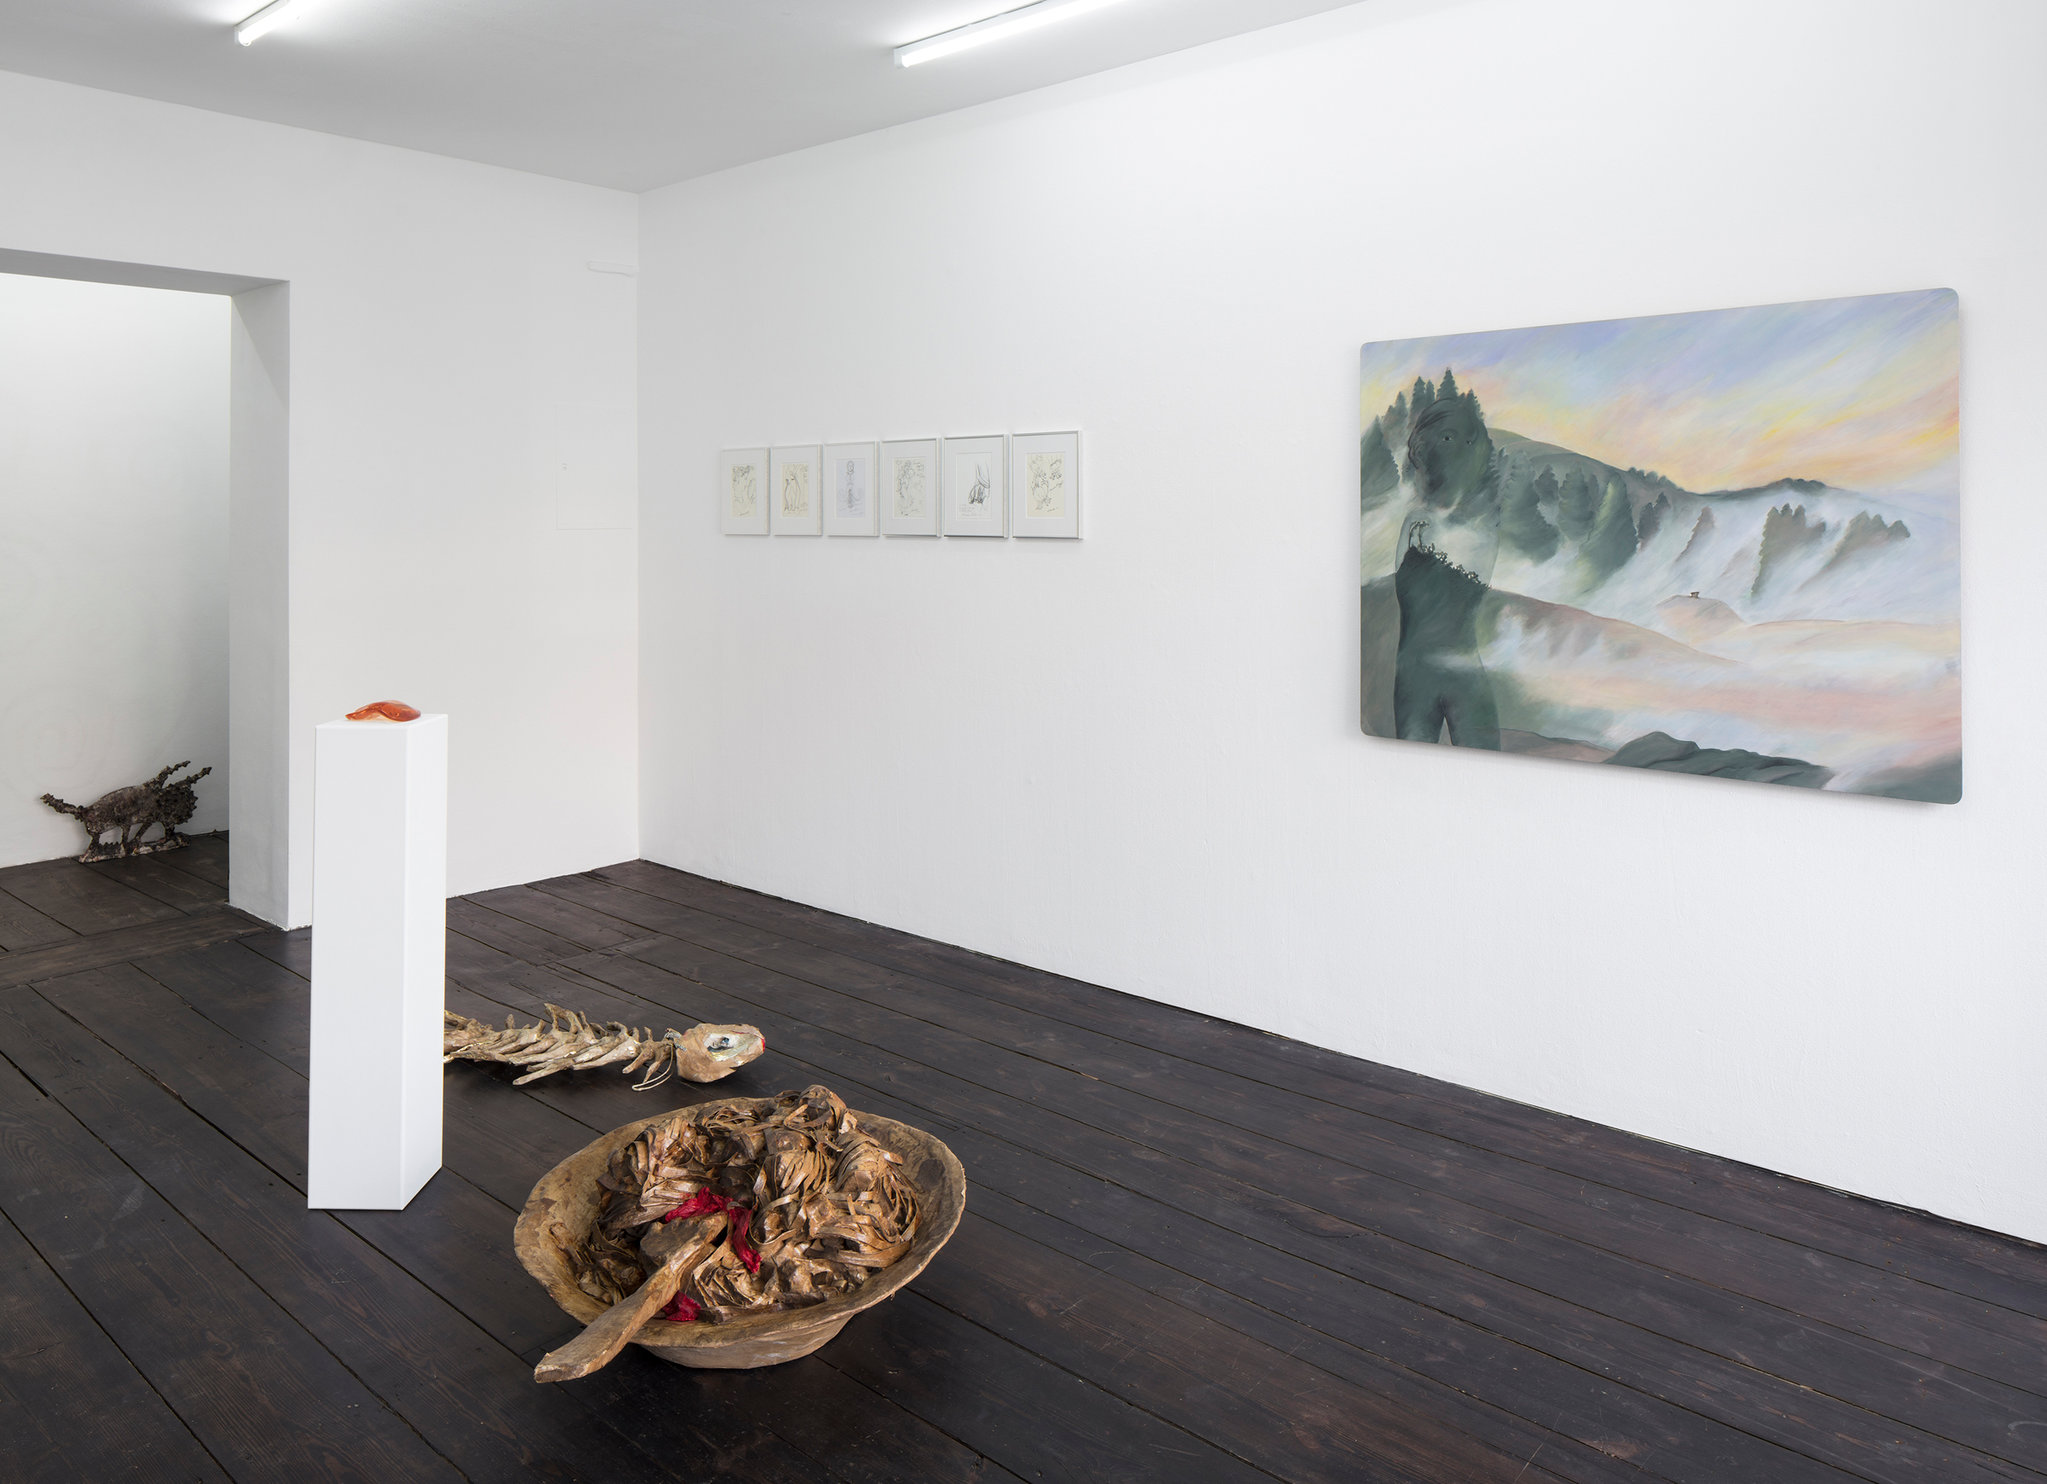 Helen Chadwick, Beatrice Marchi, Rosa Panaro, Suzanne Santoro, curated by Franc…